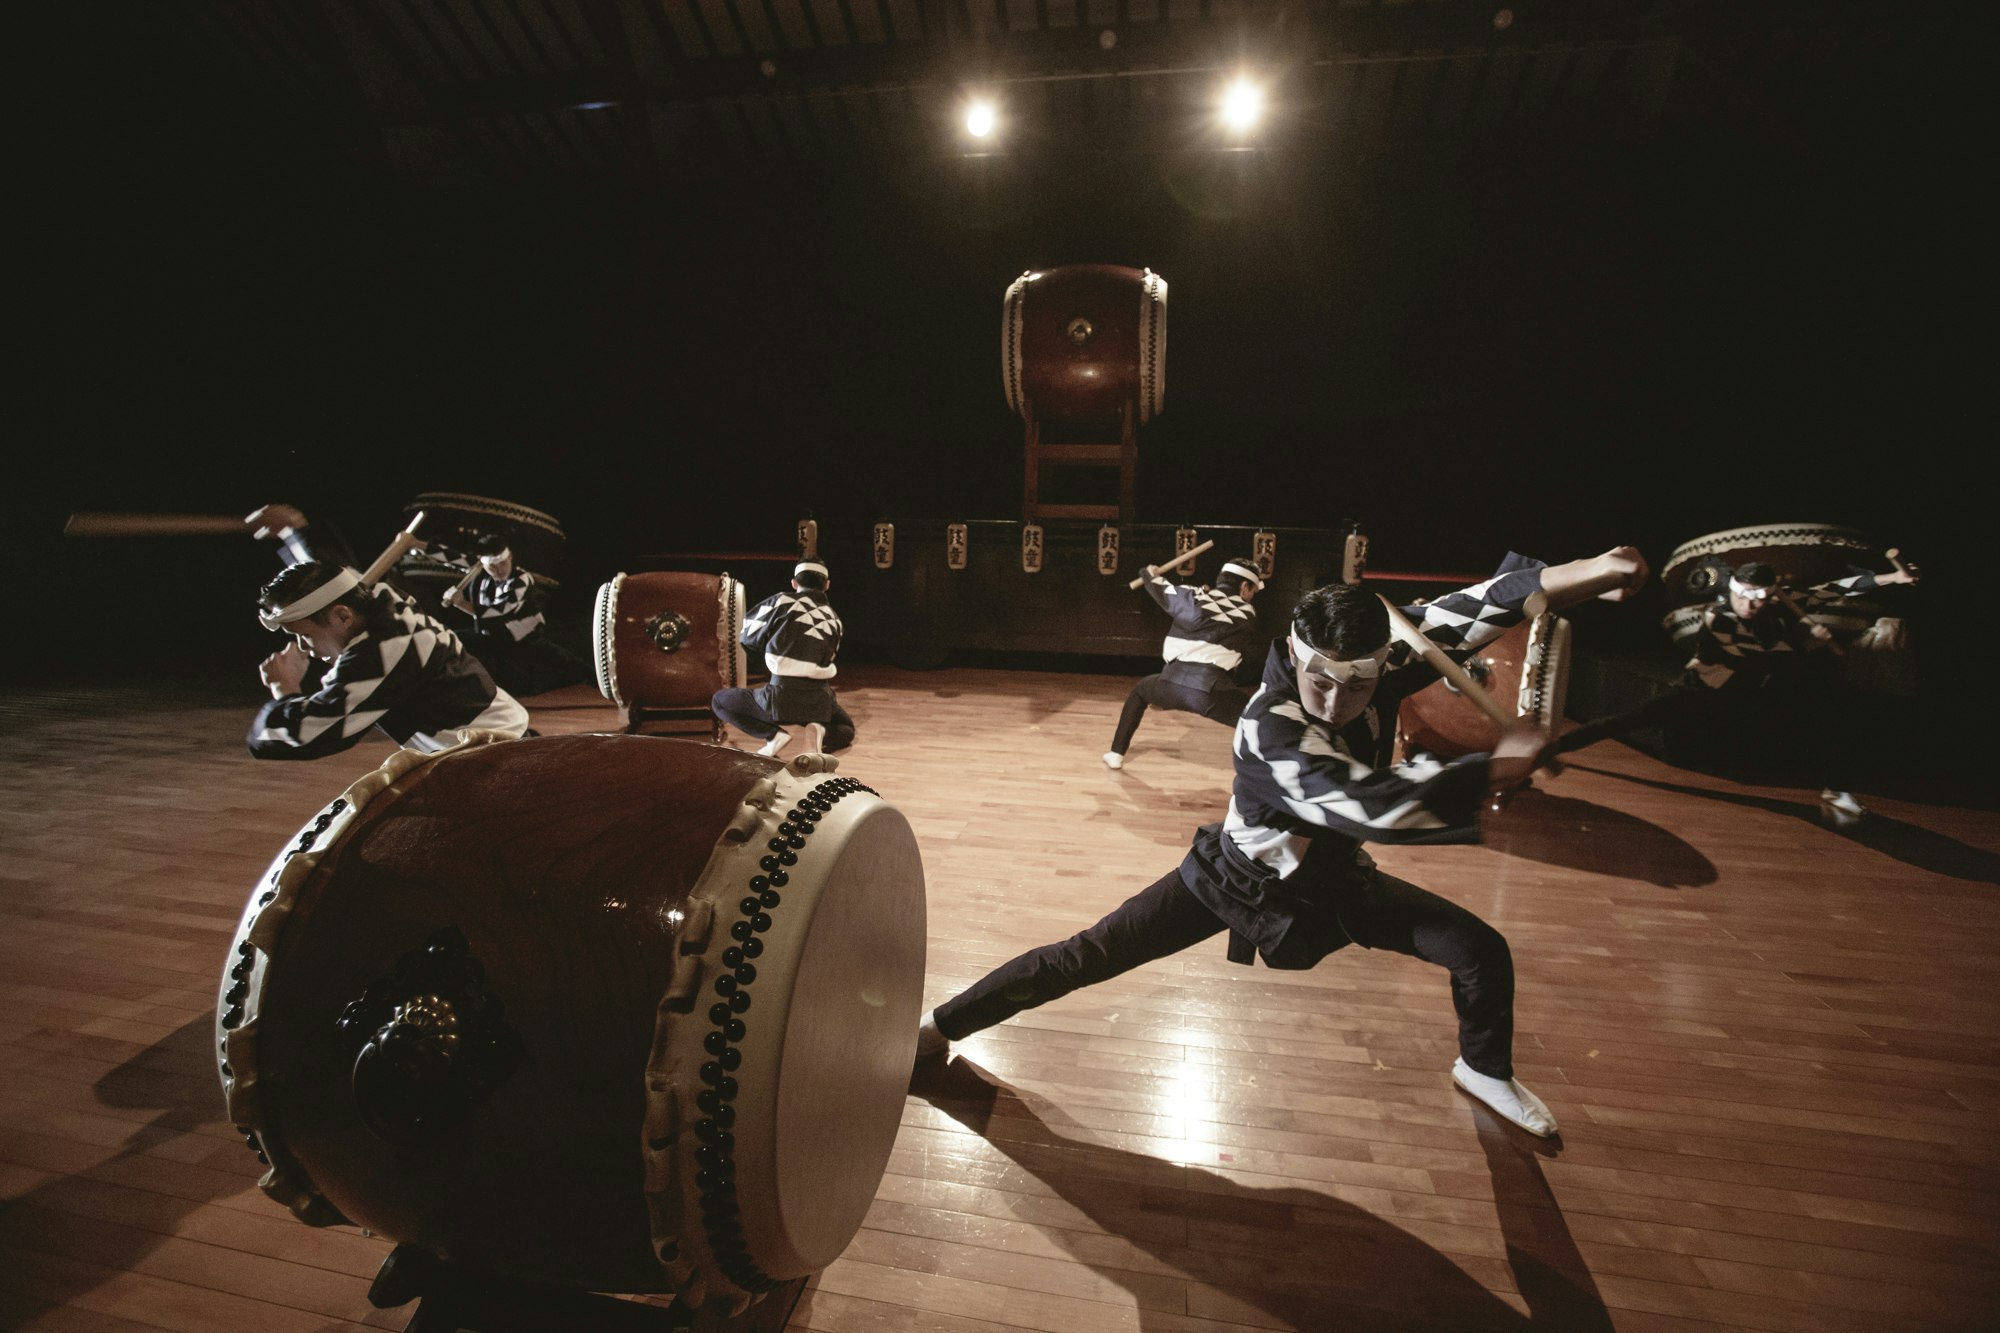 A group of Japanese drum players play on a stage. They wear black and white outfits.